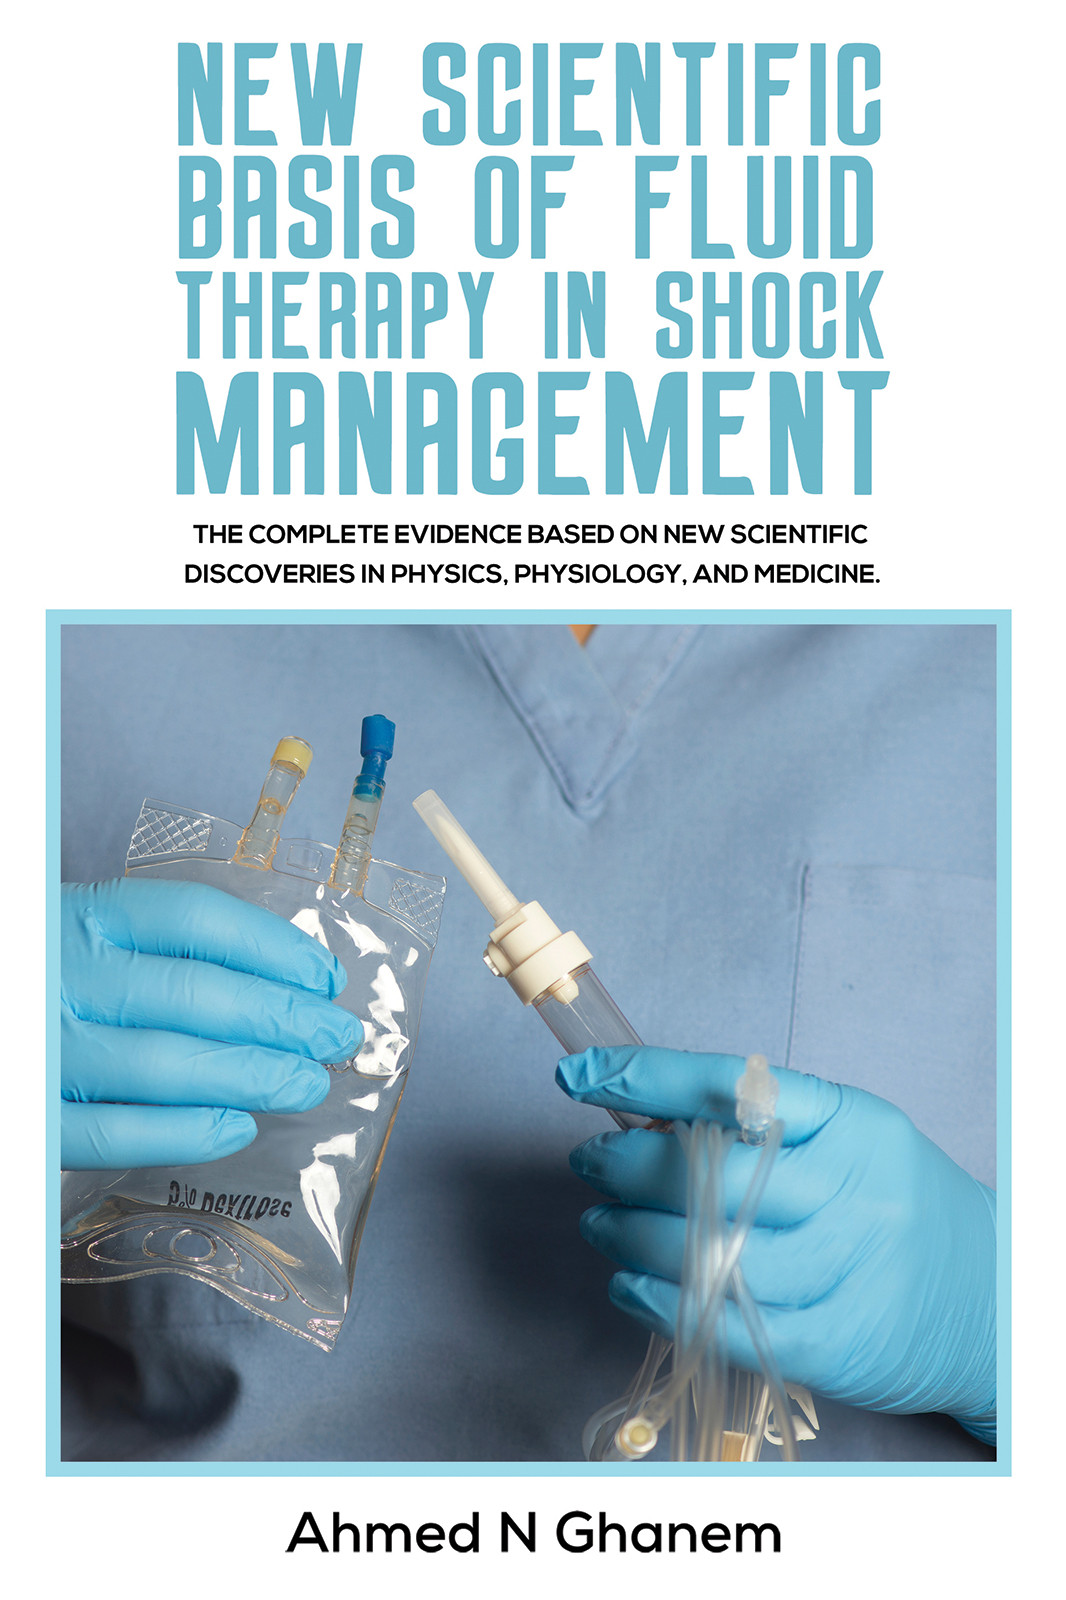 New Scientific Basis of Fluid Therapy in Shock Management-bookcover